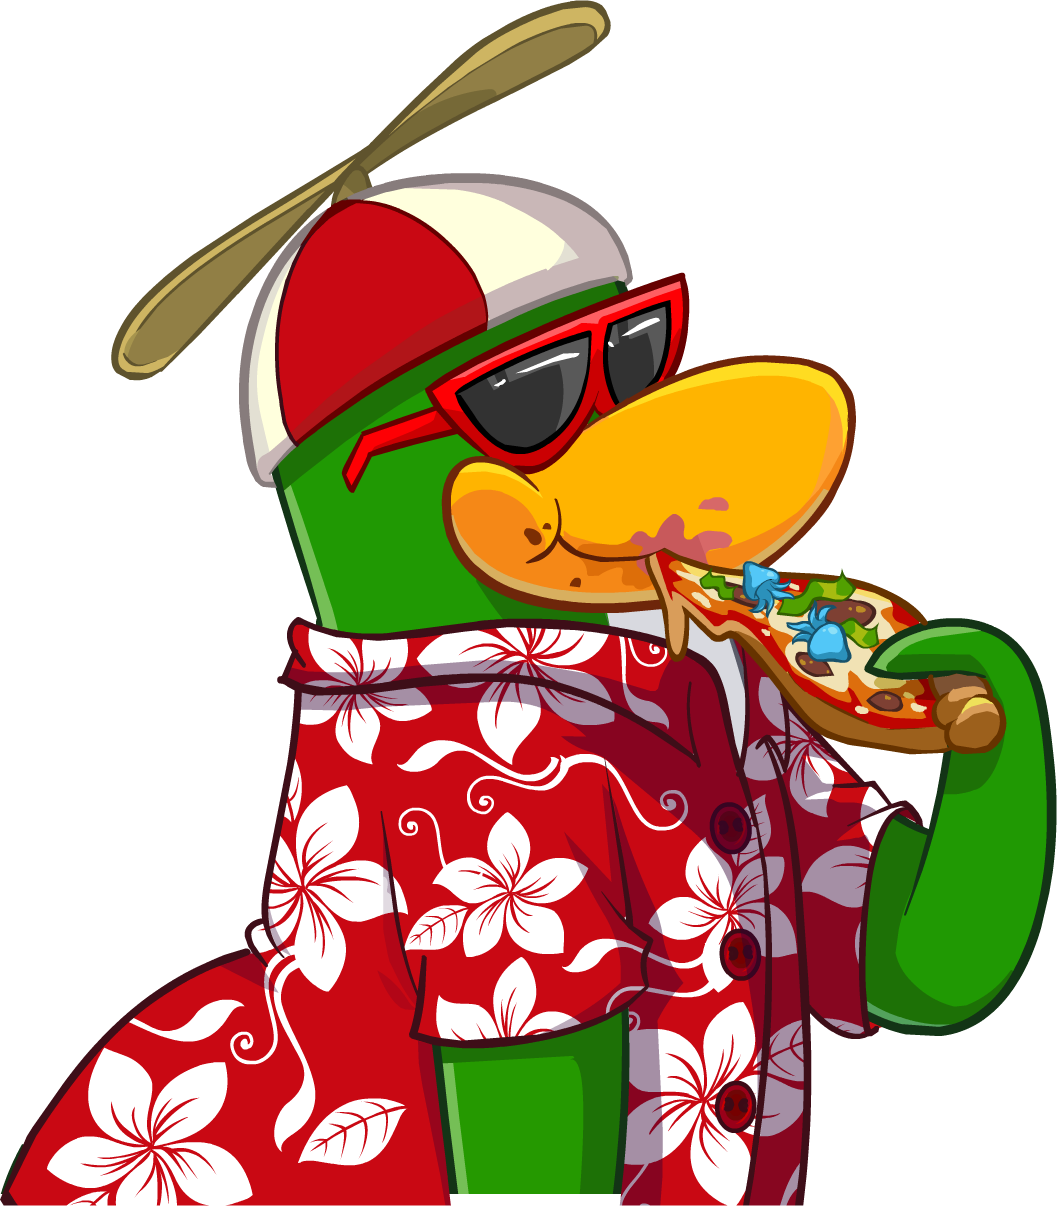 Operation Hot Sauce Rookie Eating Pizza - Rookie From Club Penguin (1057x1206)